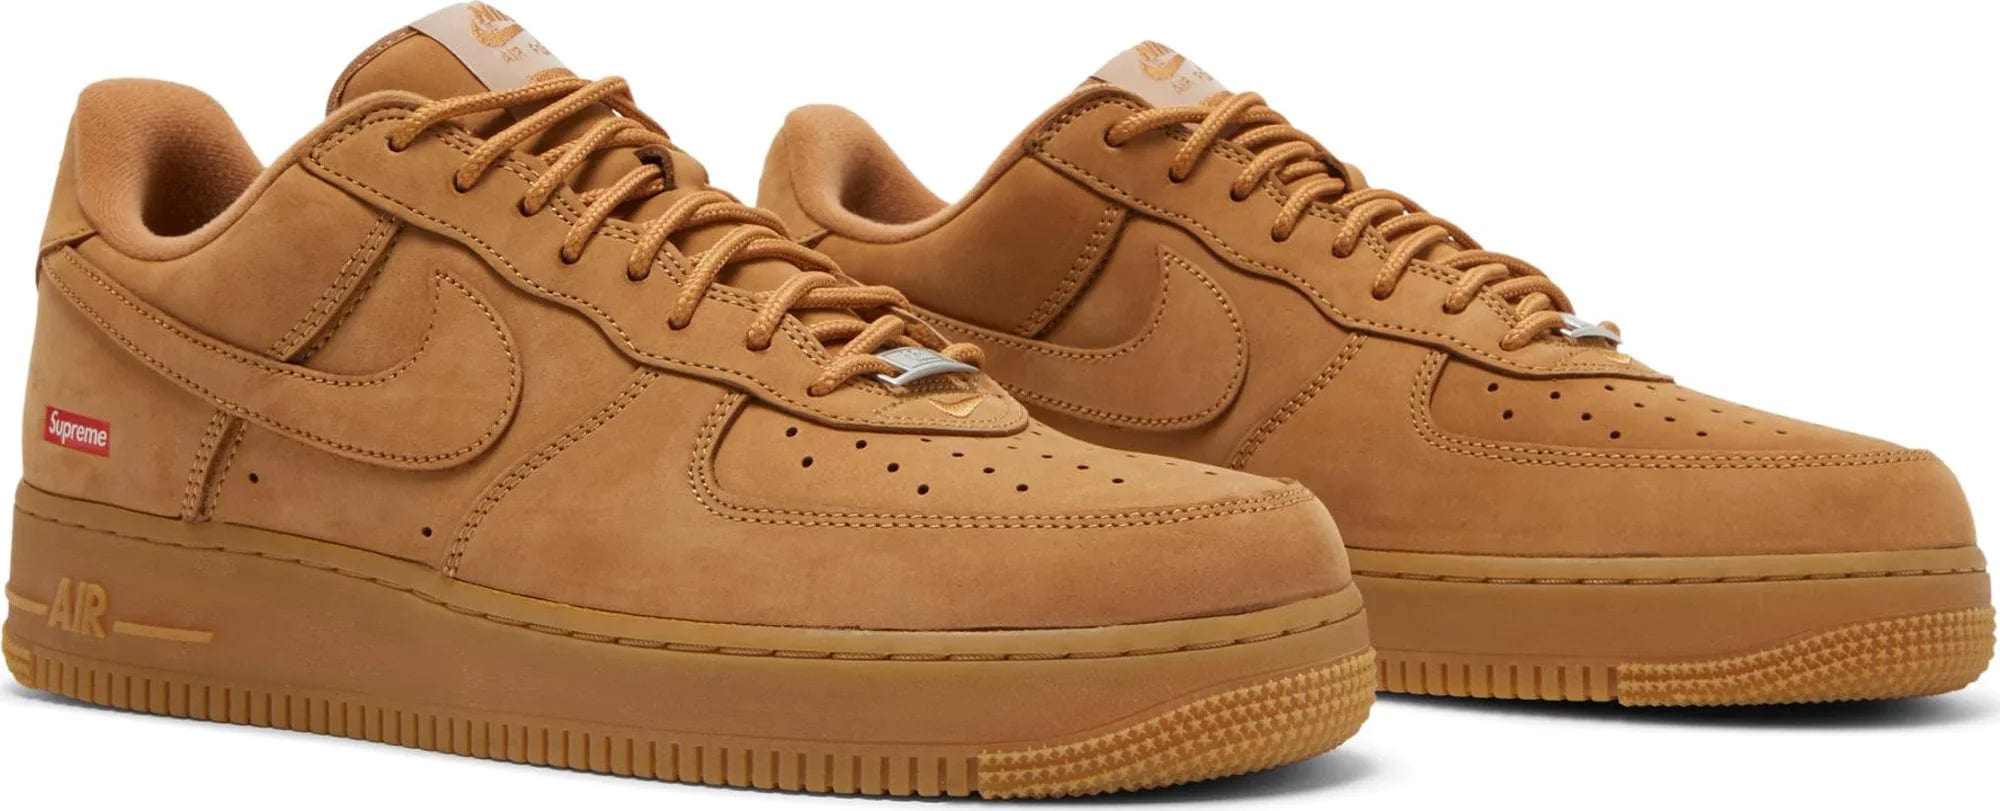 Where To Buy Supreme Nike Air Force 1 And Other Dope Drops This Week